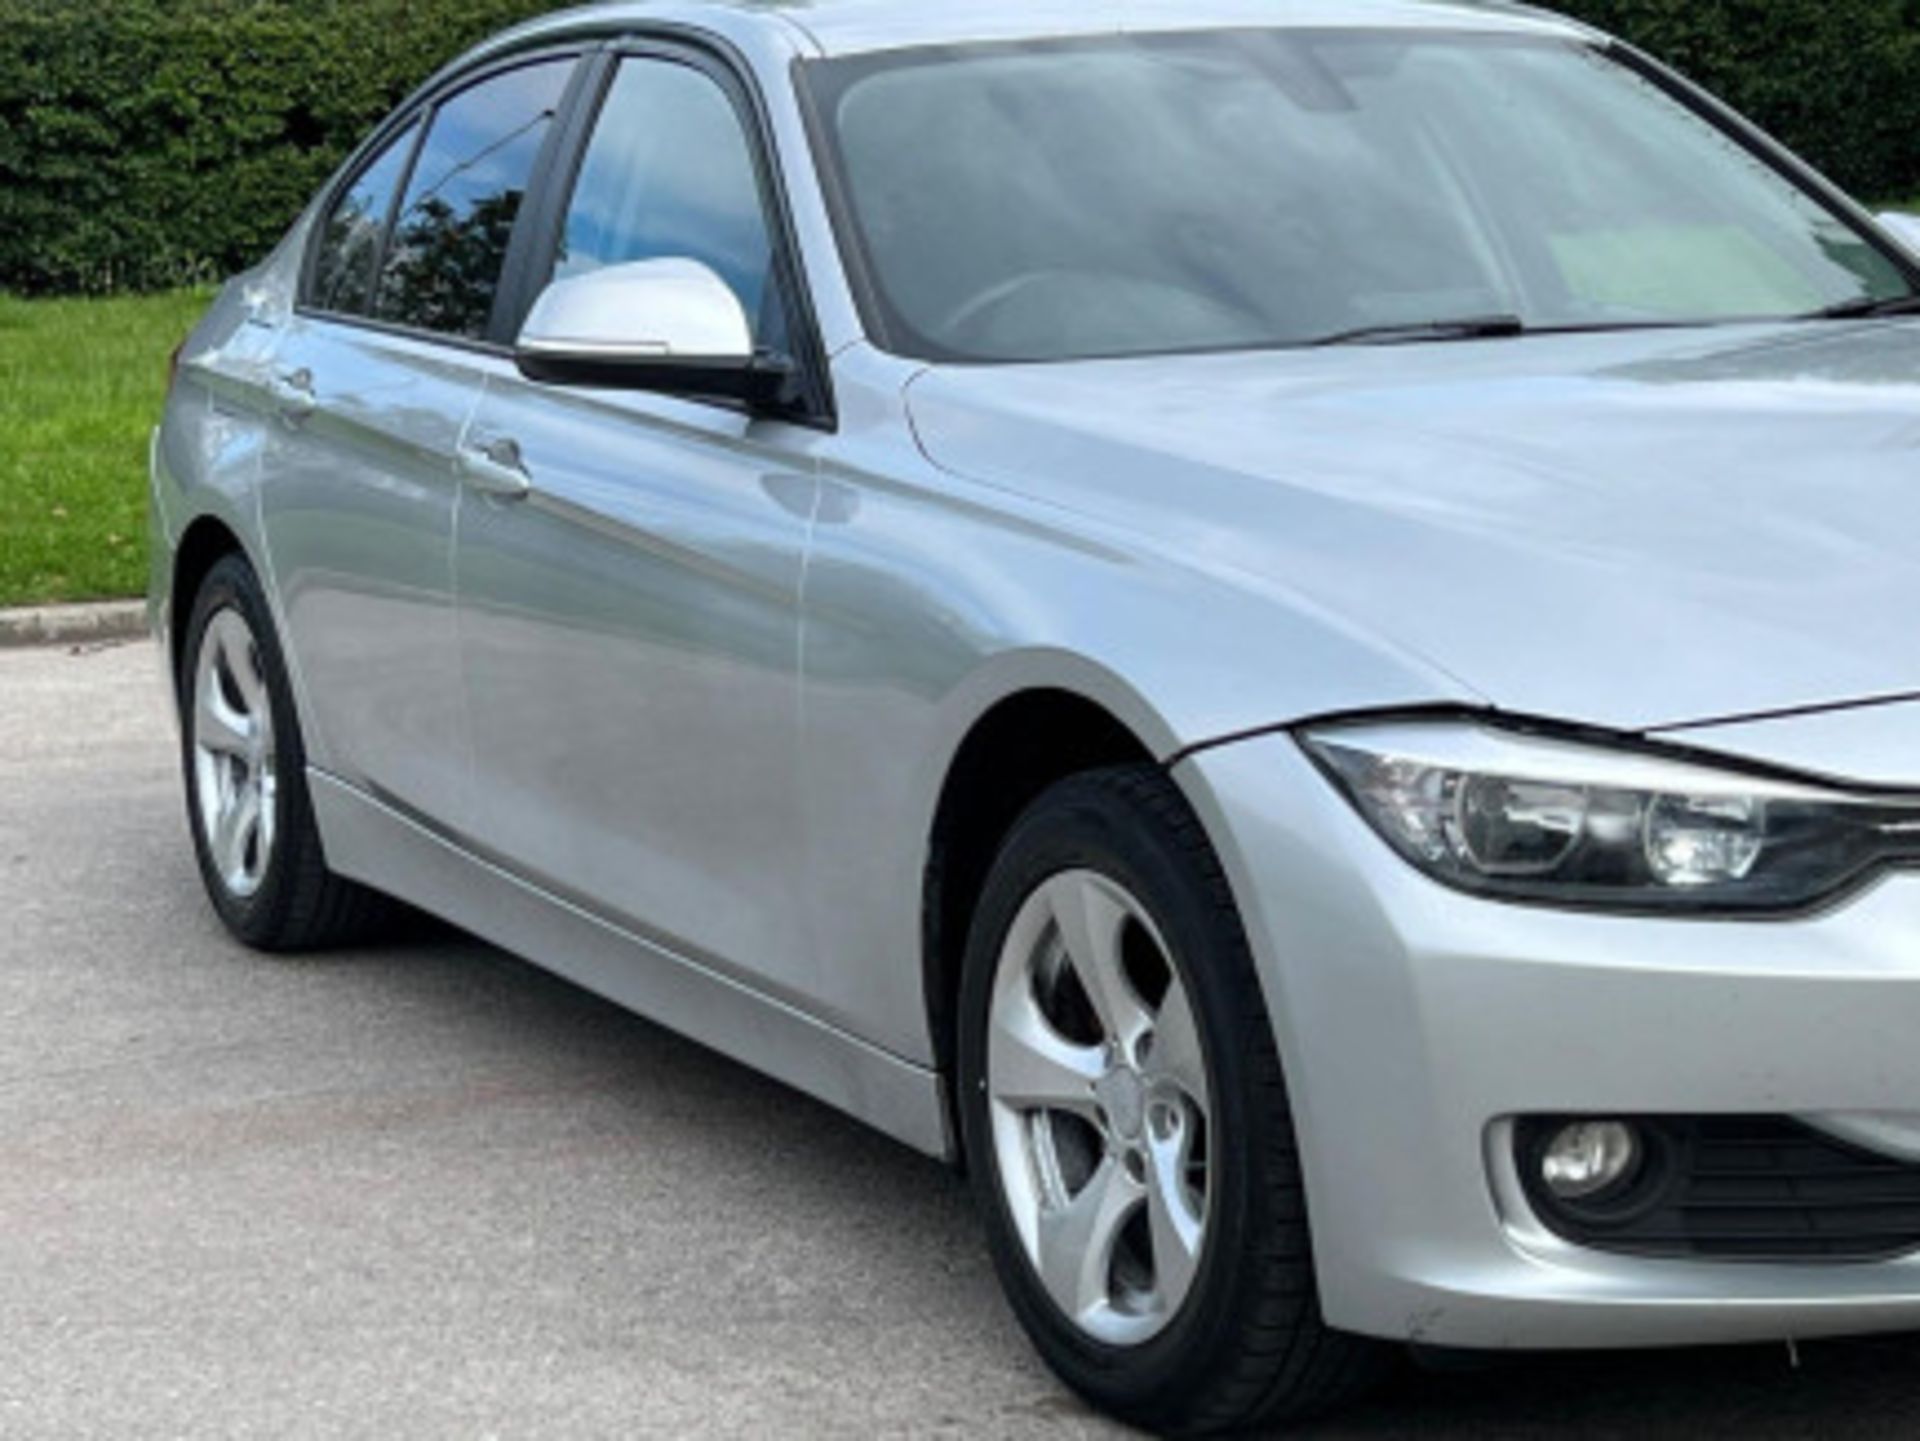 BMW 3 SERIES 2.0 DIESEL ED START STOP - A WELL-MAINTAINED GEM >>--NO VAT ON HAMMER--<< - Image 111 of 229